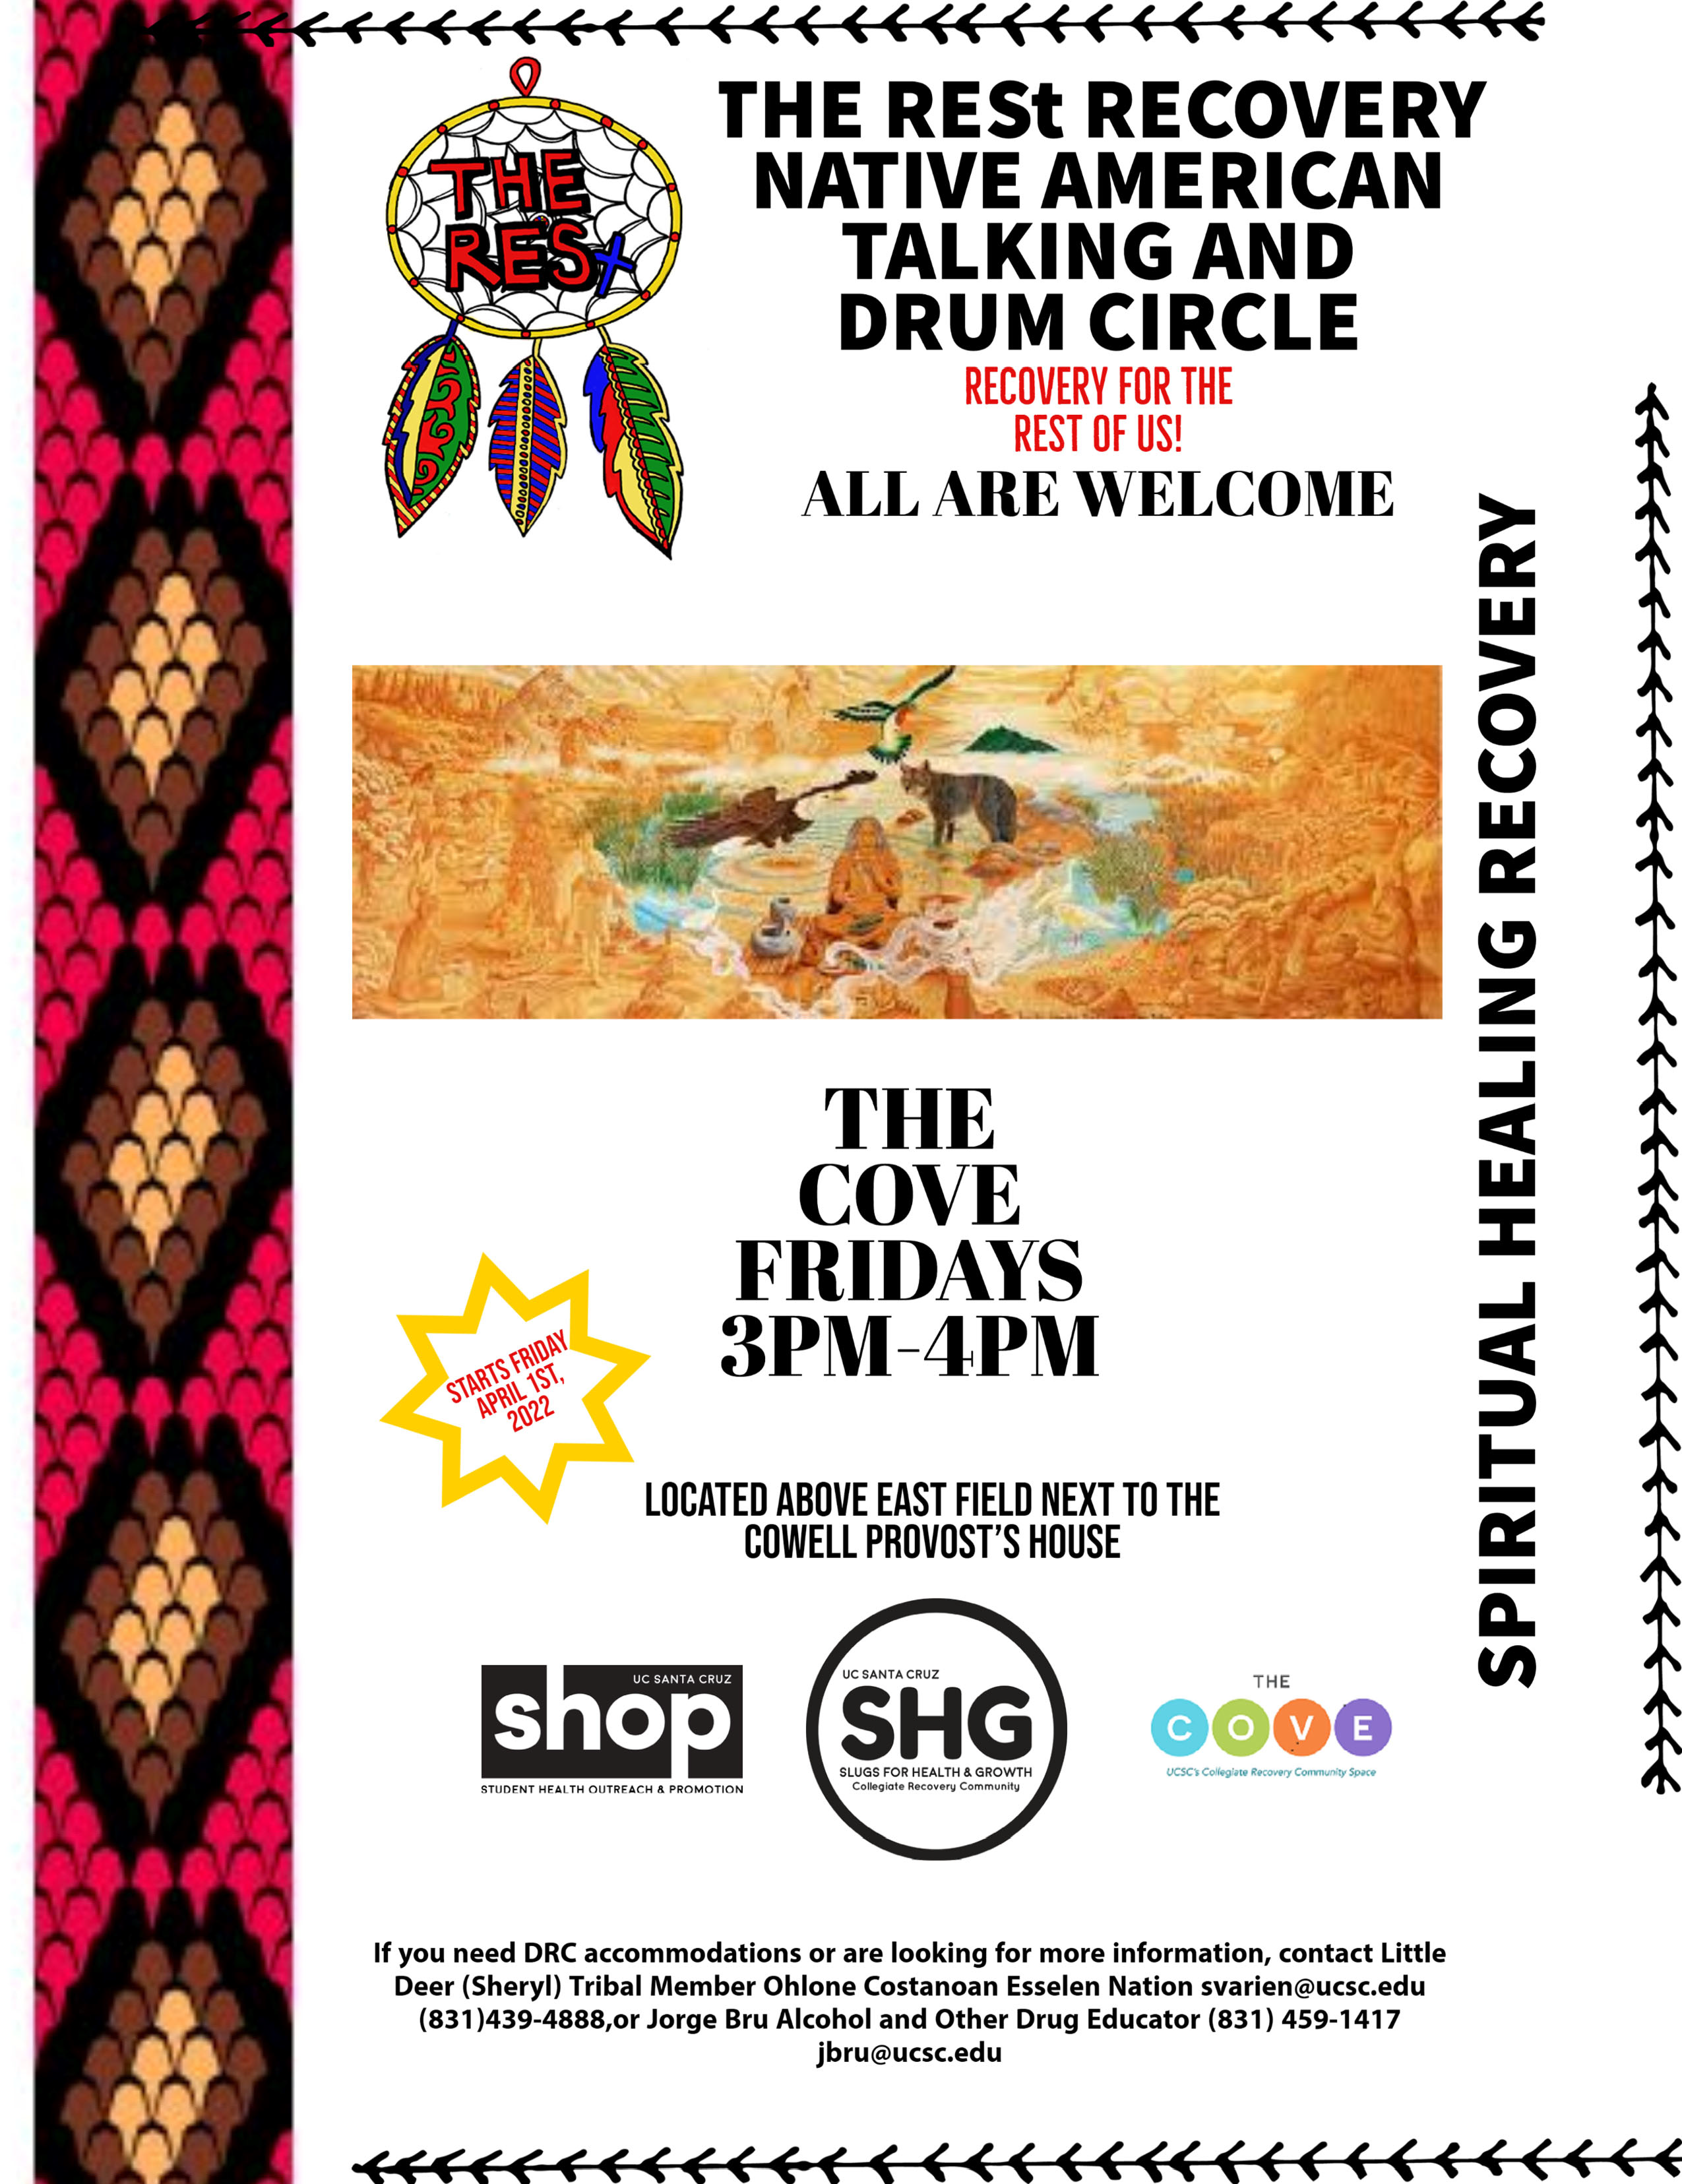 The Rest recovery native american talking and drum circle. The cove Fridays from 3 pm to 4 pm. 